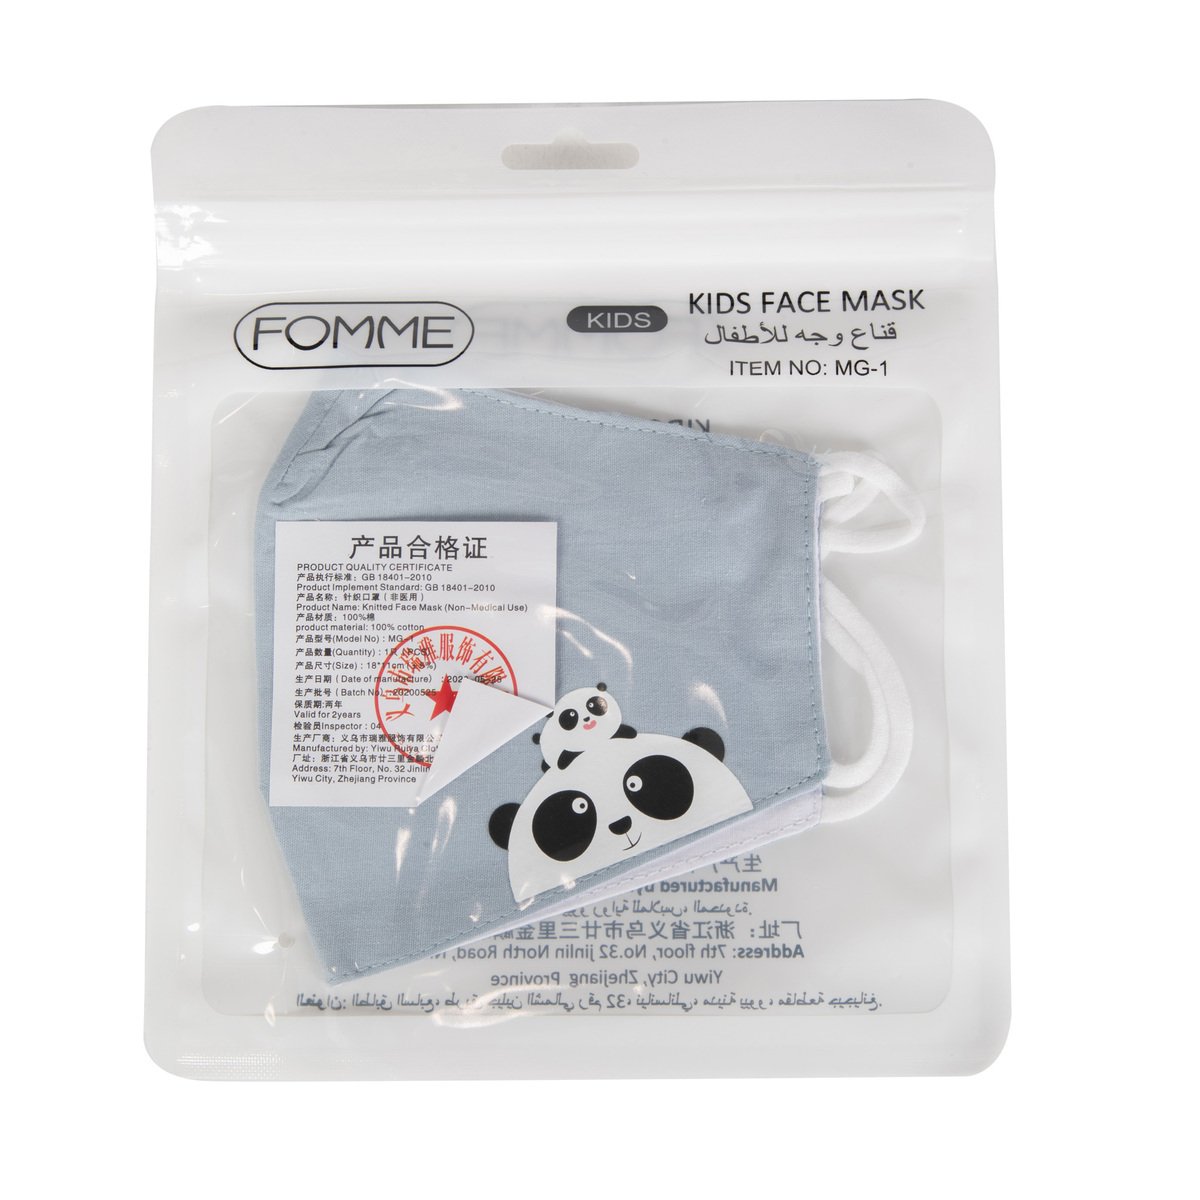 Fomme Kids Face Mask MG-1 1pc